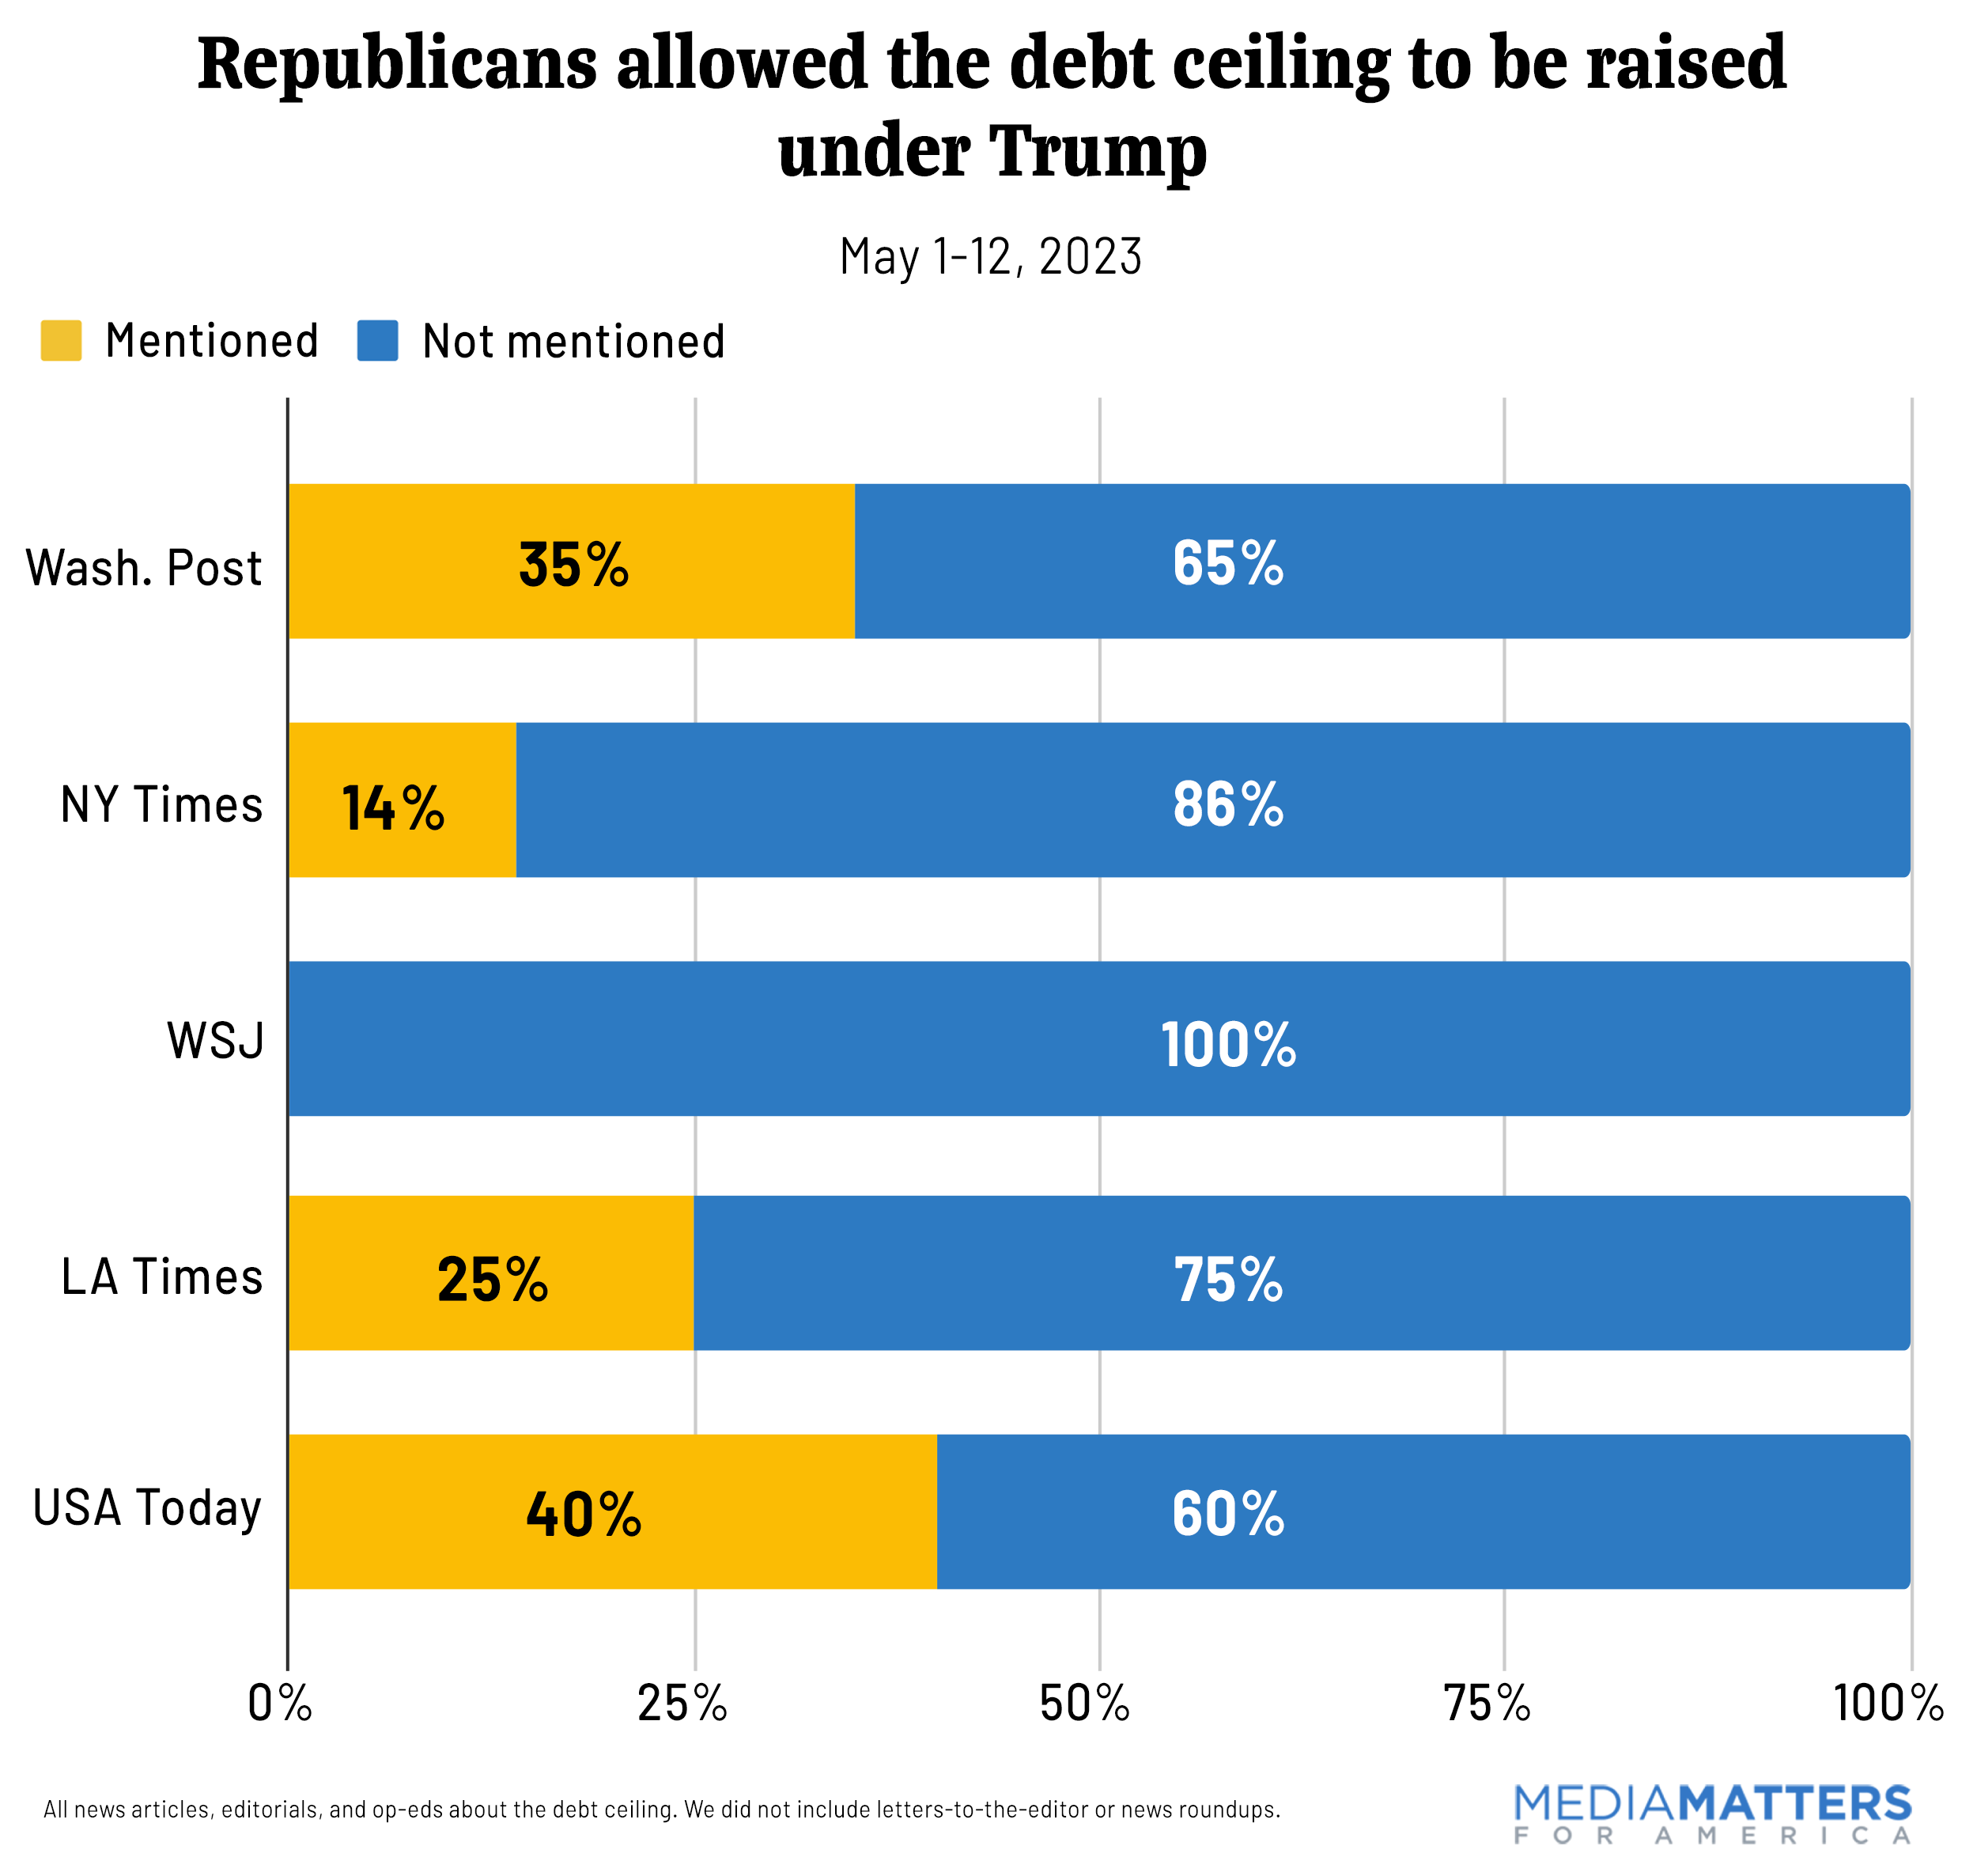 Republicans allowed the debt ceiling to be raised under Trump